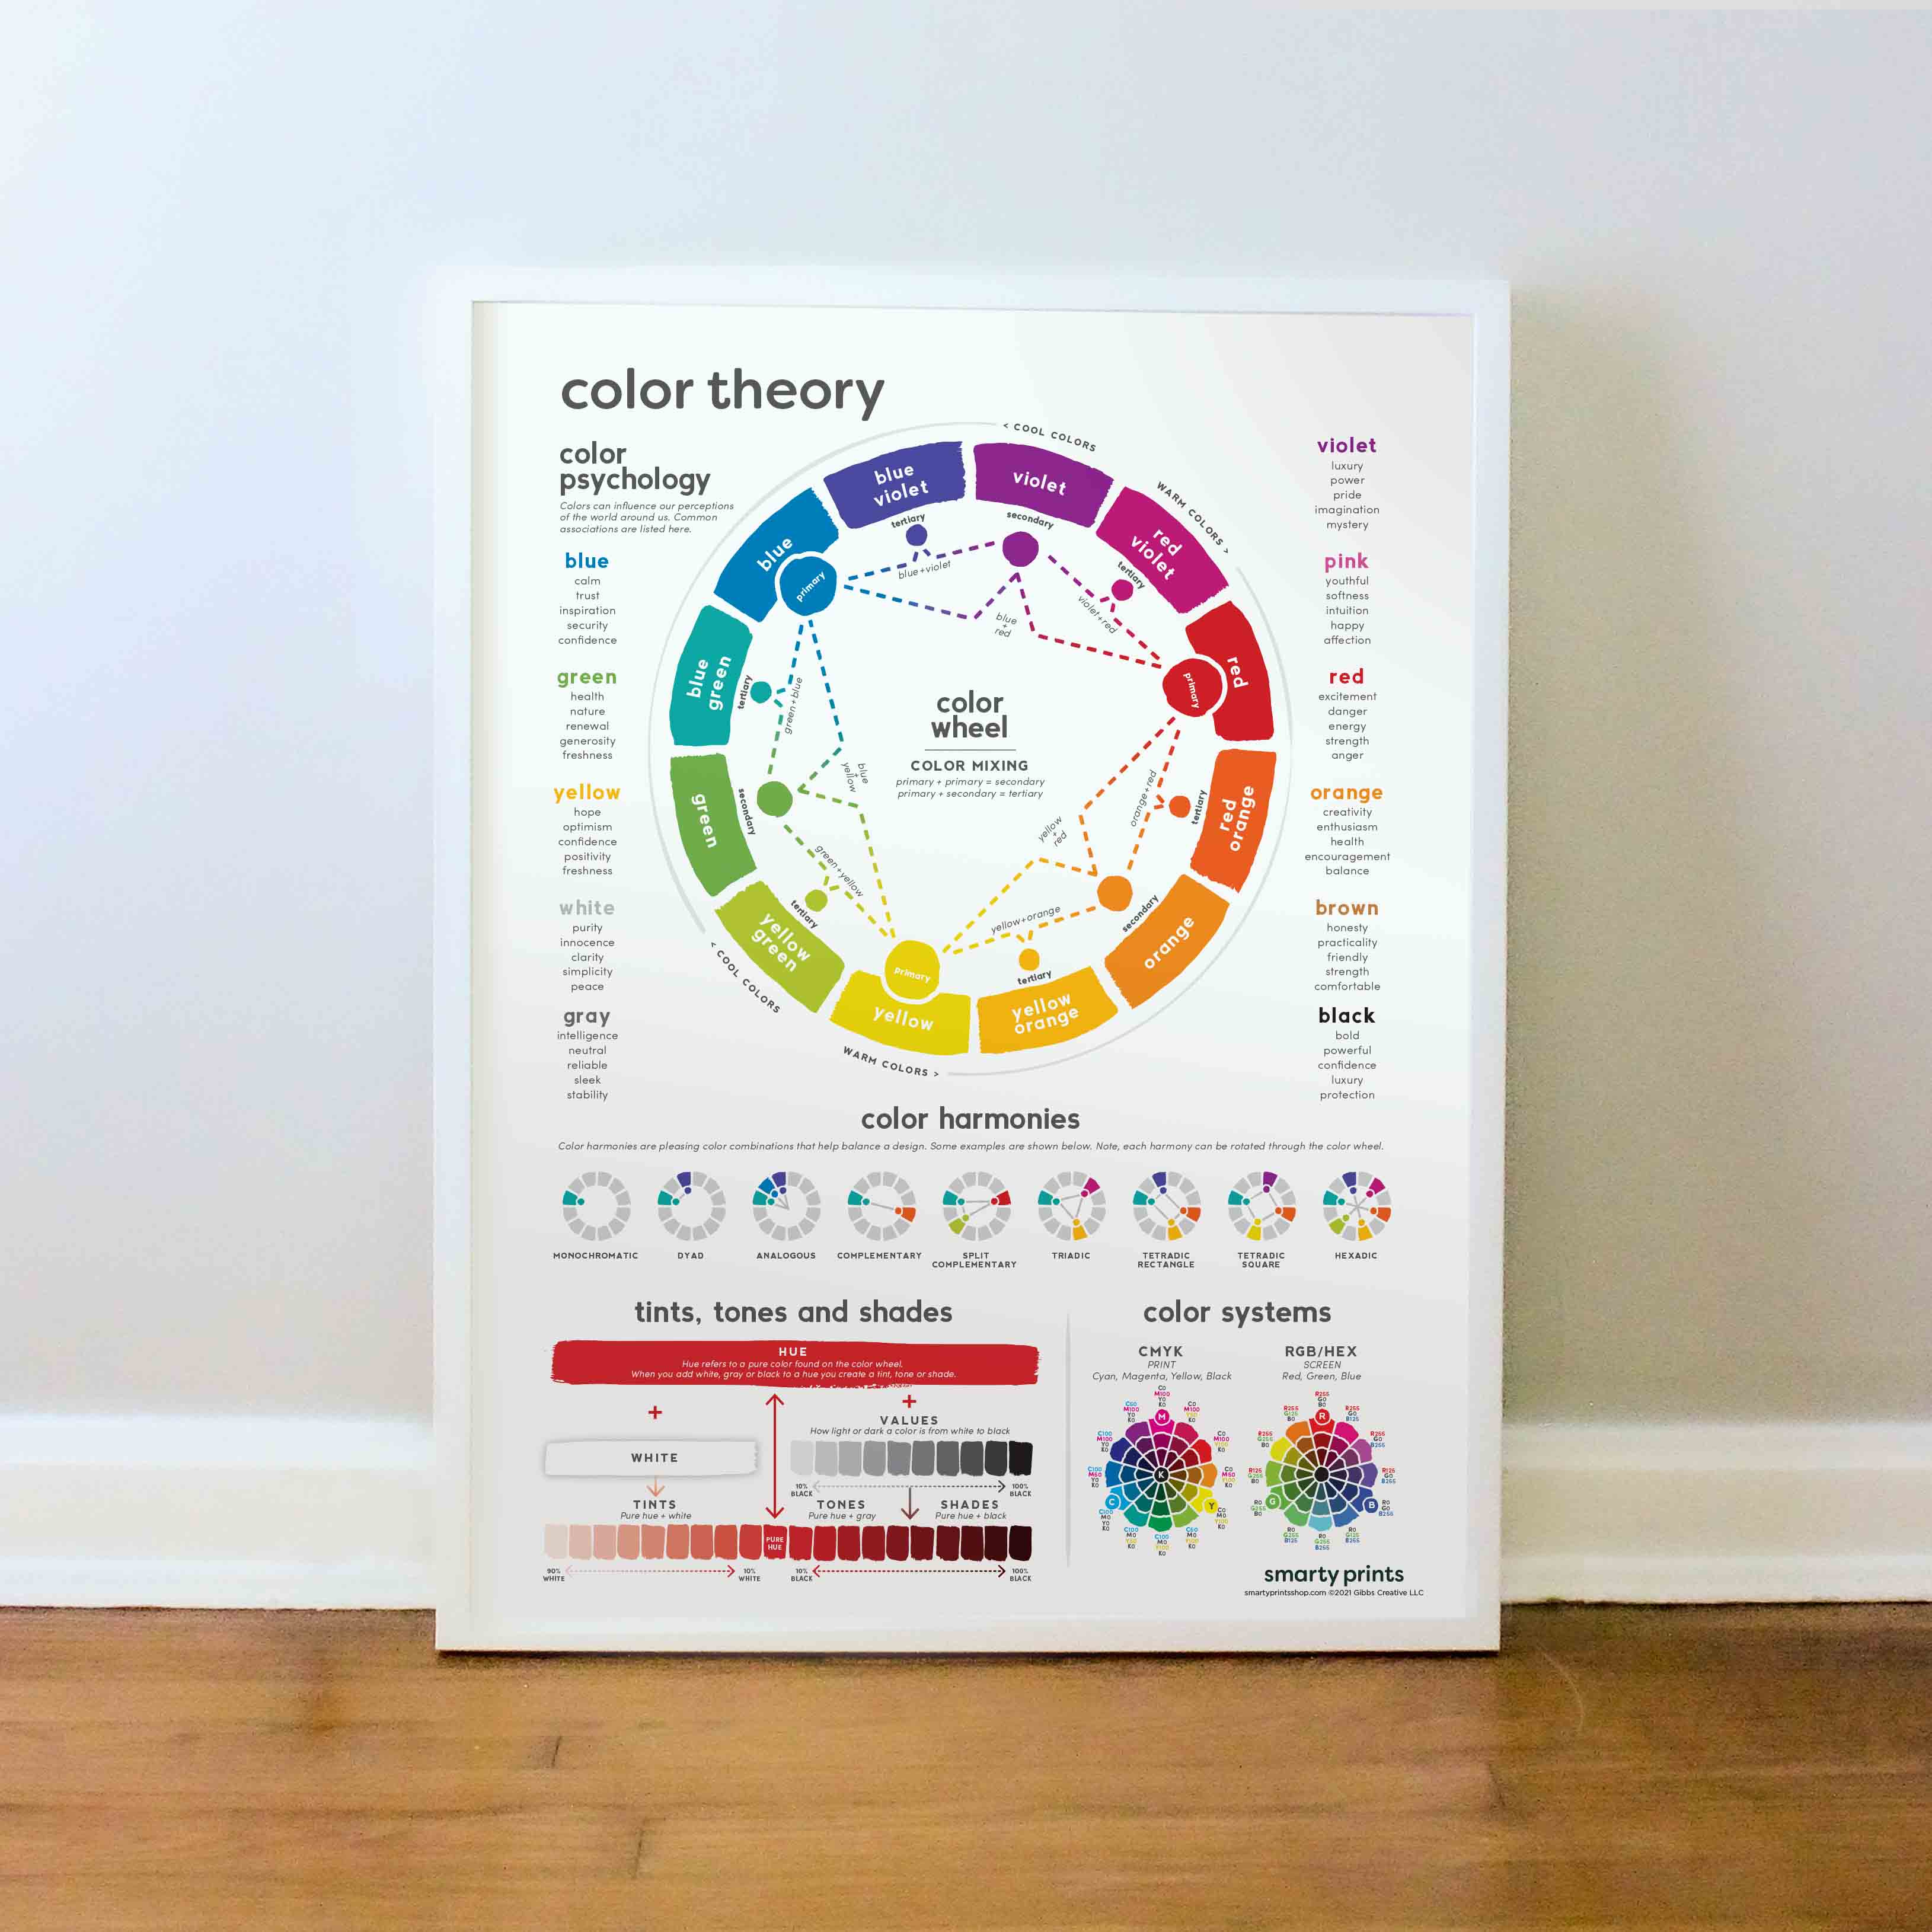 Color Theory Poster, Color Theory Poster, Color Wheel, Graphic Design,  Color Theory, Color Wheel Posters Canvas Art Posters And Wall Art Images  Prints